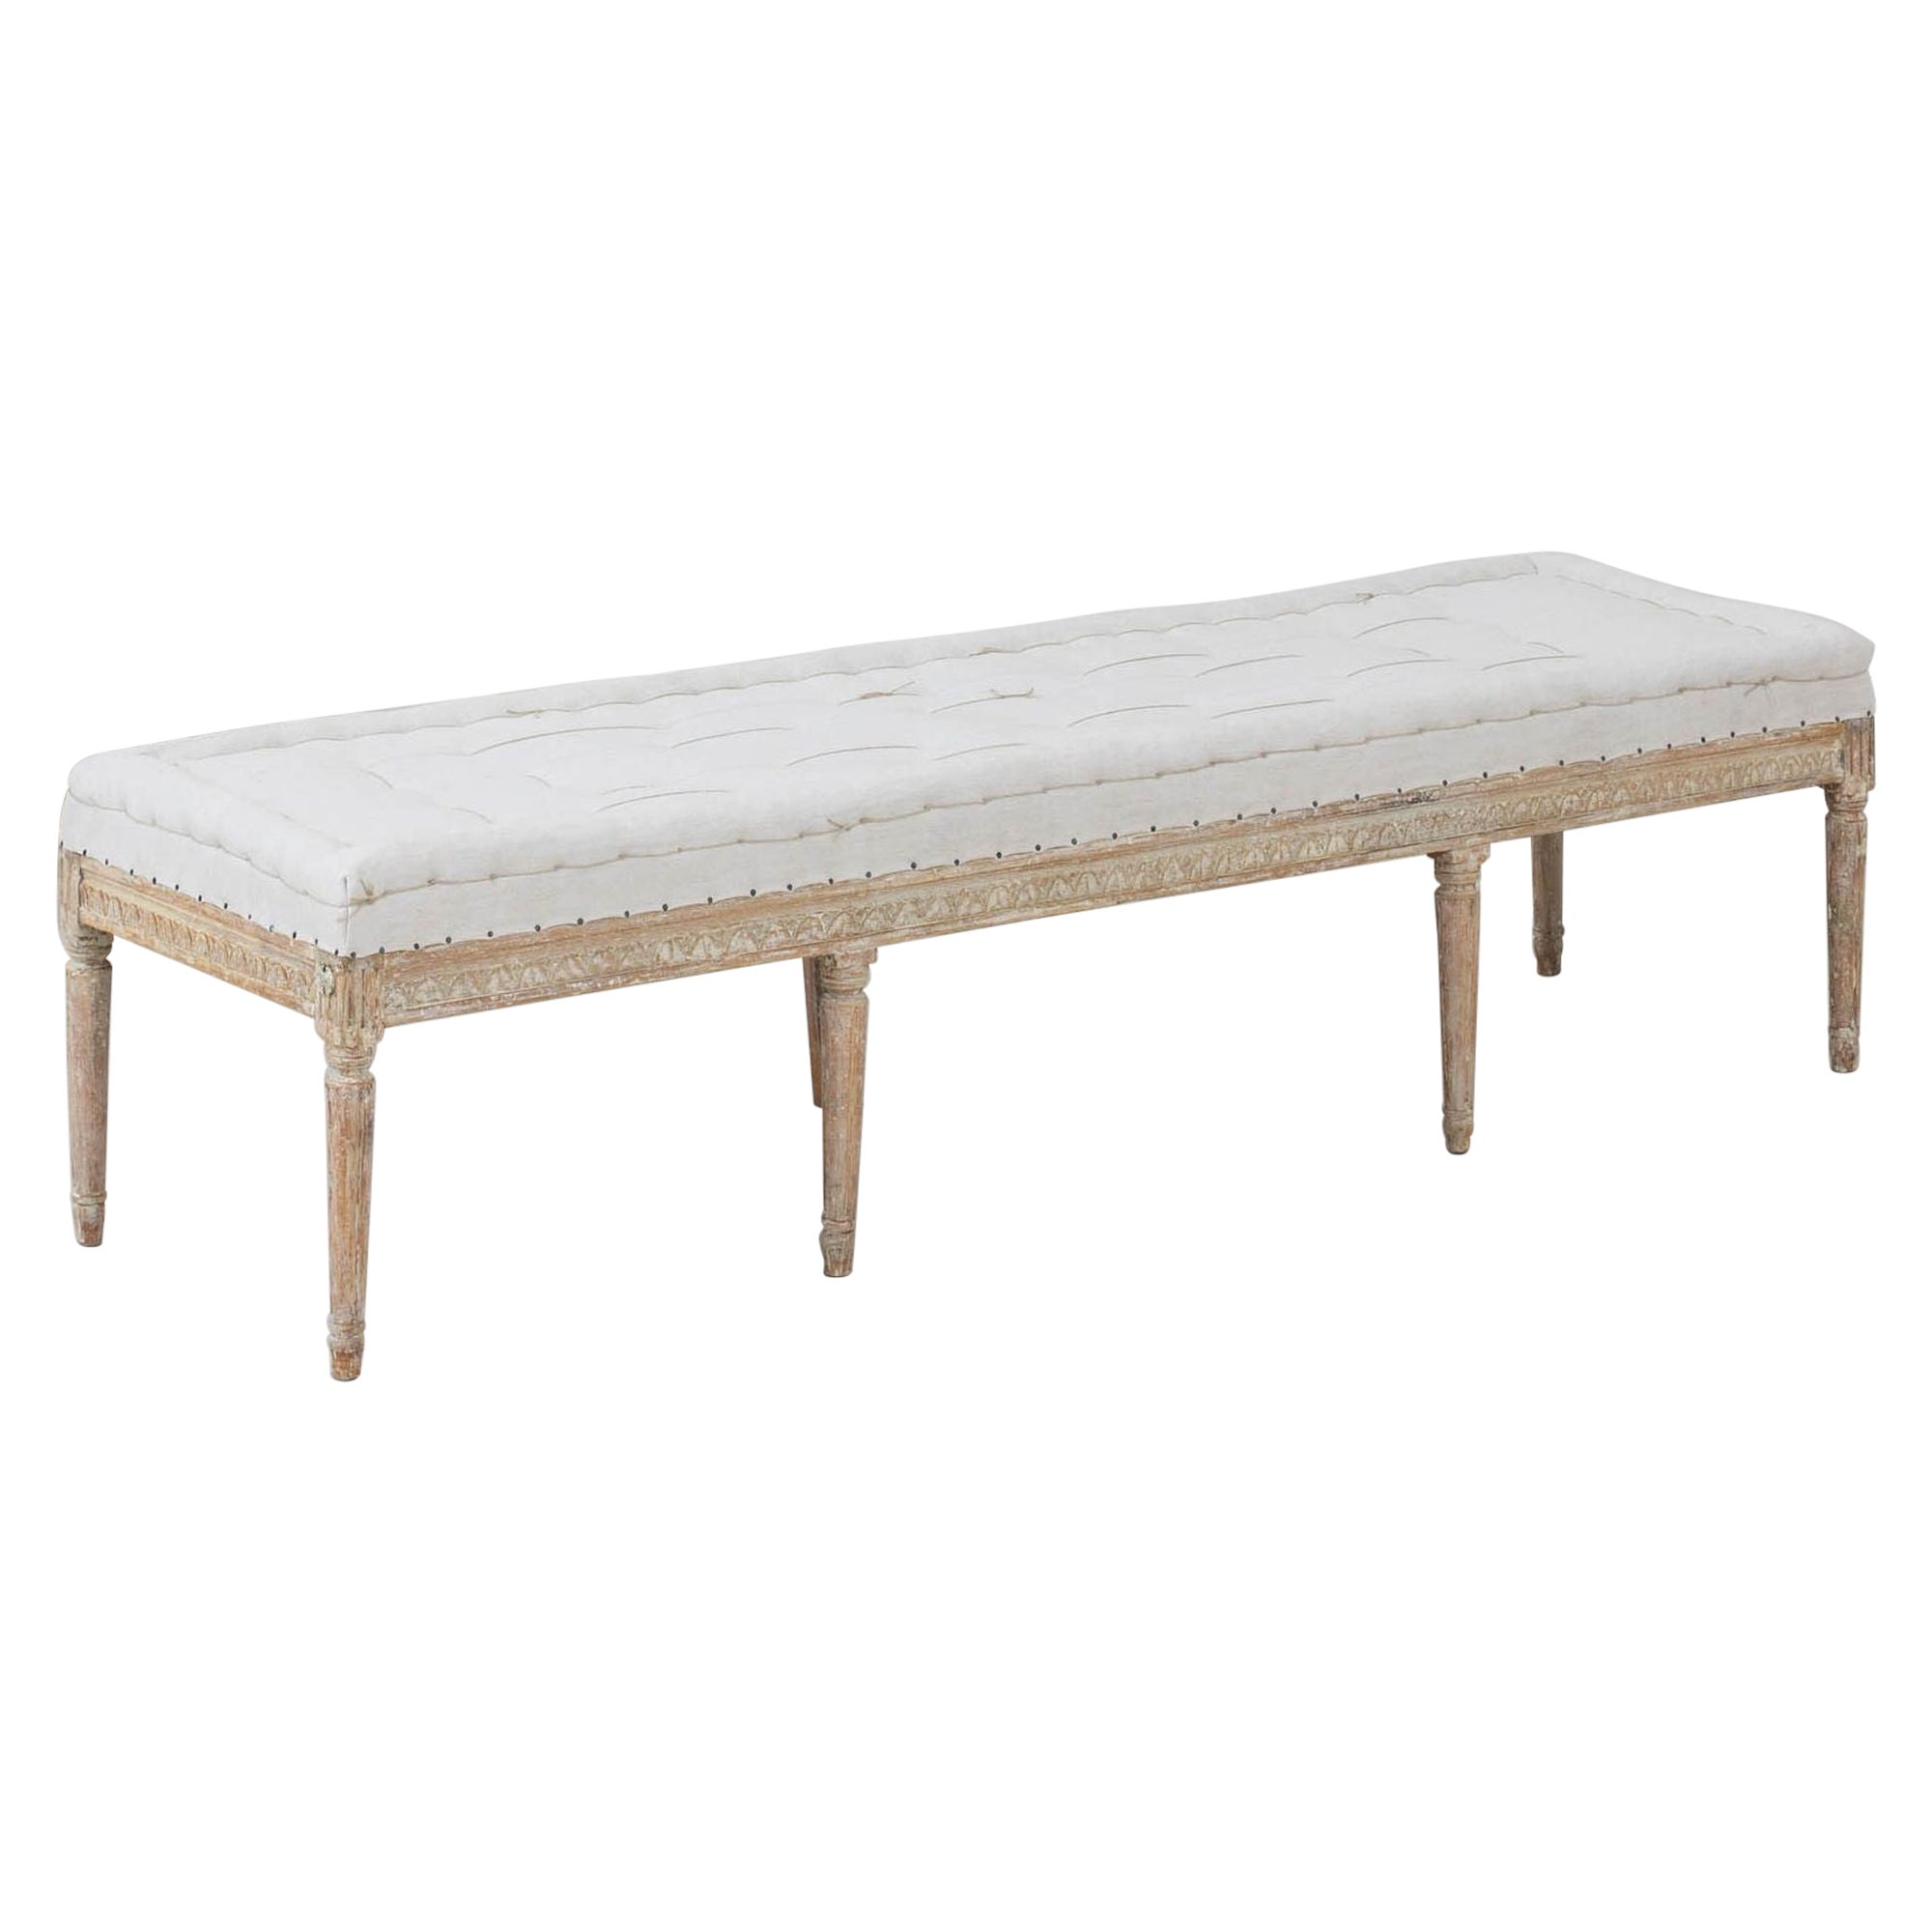 19th c. Swedish Gustavian Period Bench or Footstool in Original Paint